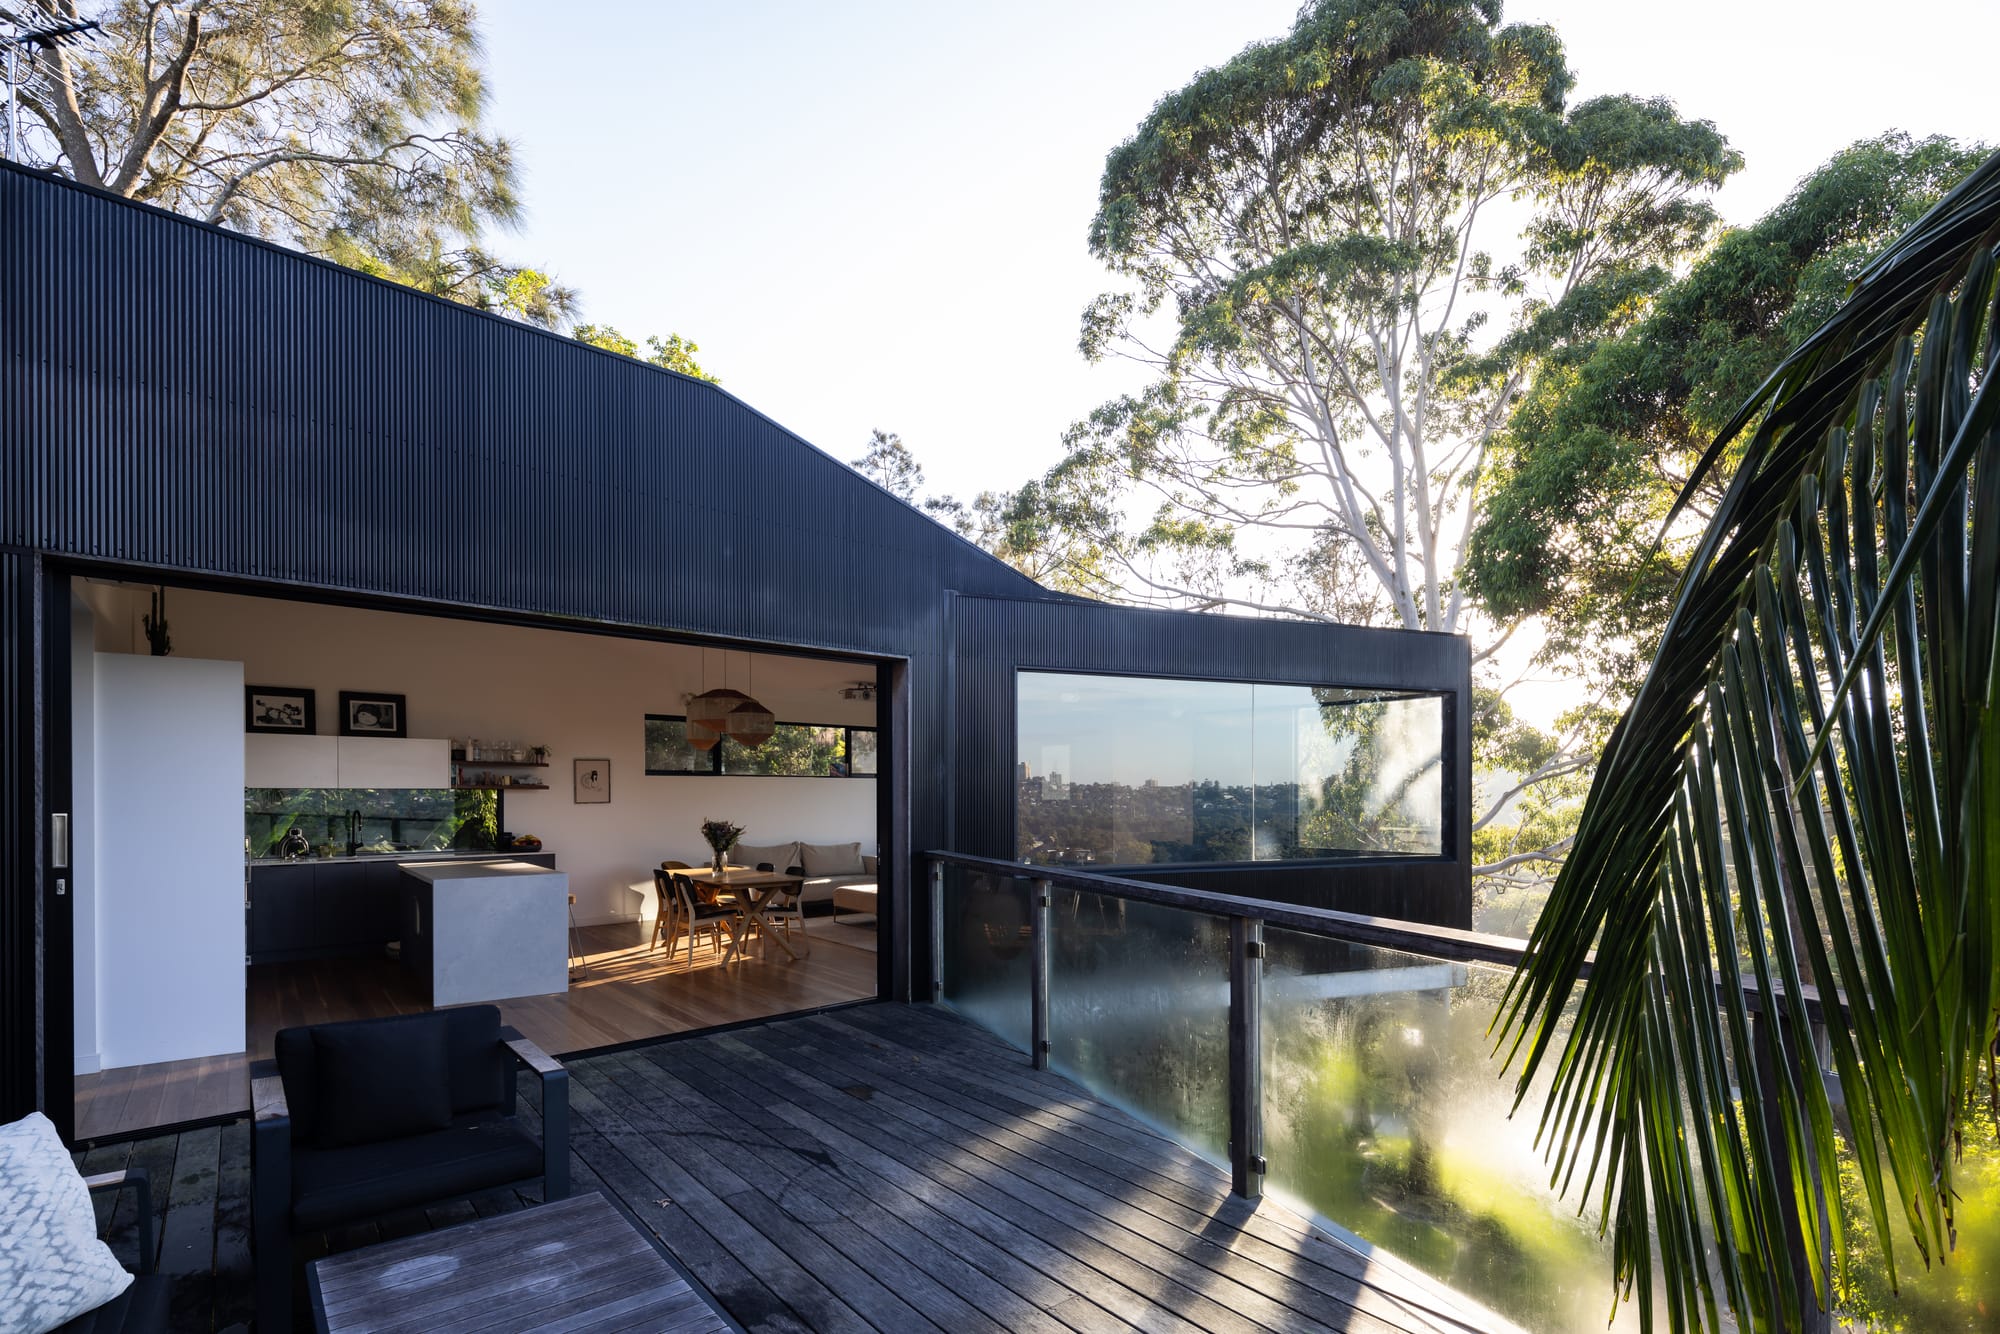 Tree House by North By North. Photography by Simon Whitbread. Timber deck extending out from kitchen and dining. Black timber clad exterior. 